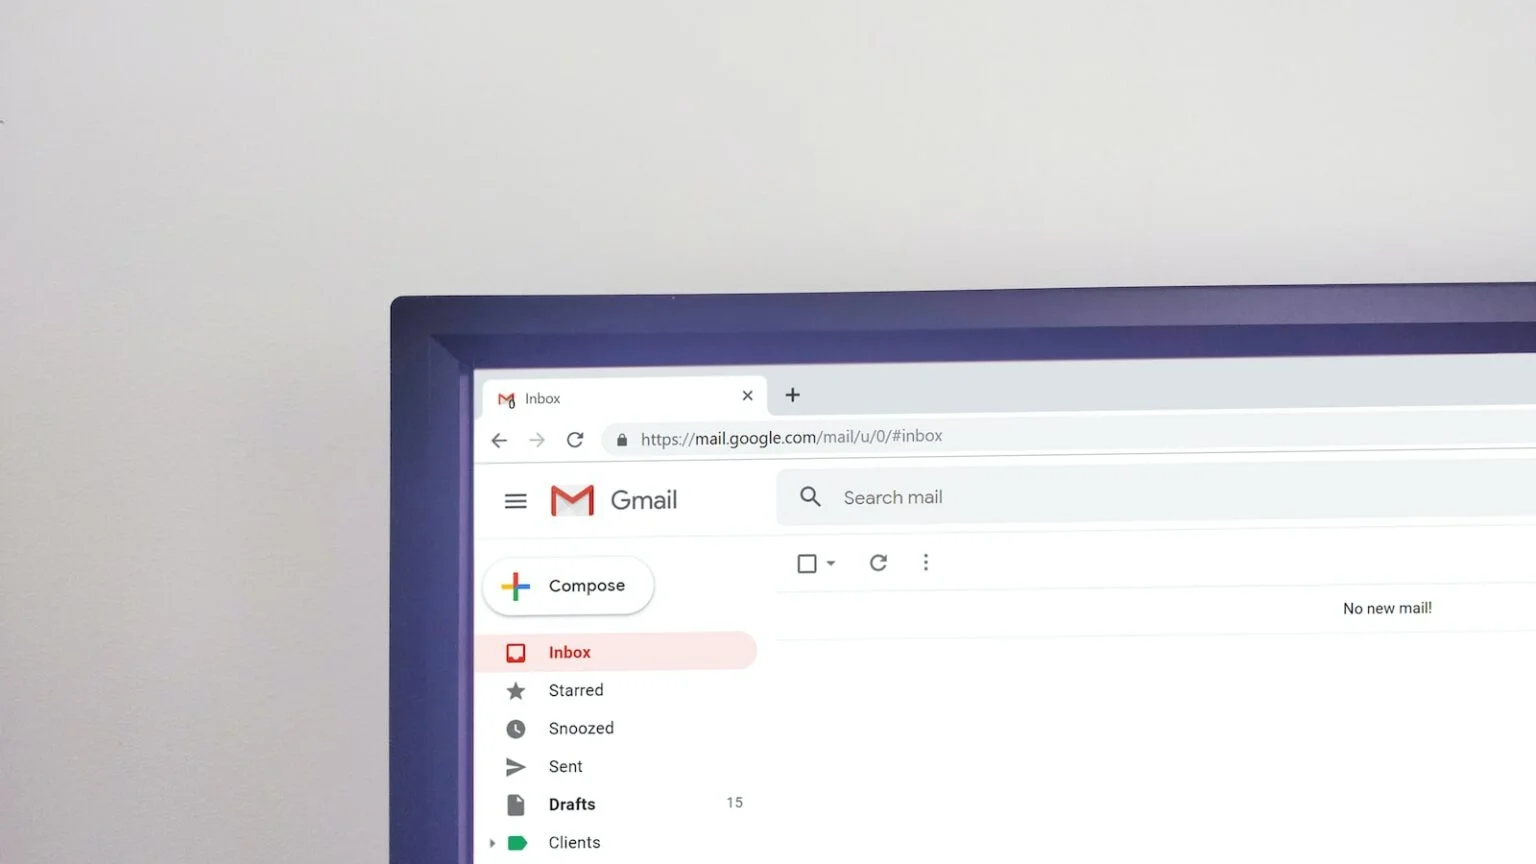 A Laptop displaying the Gmail interface with shortcuts